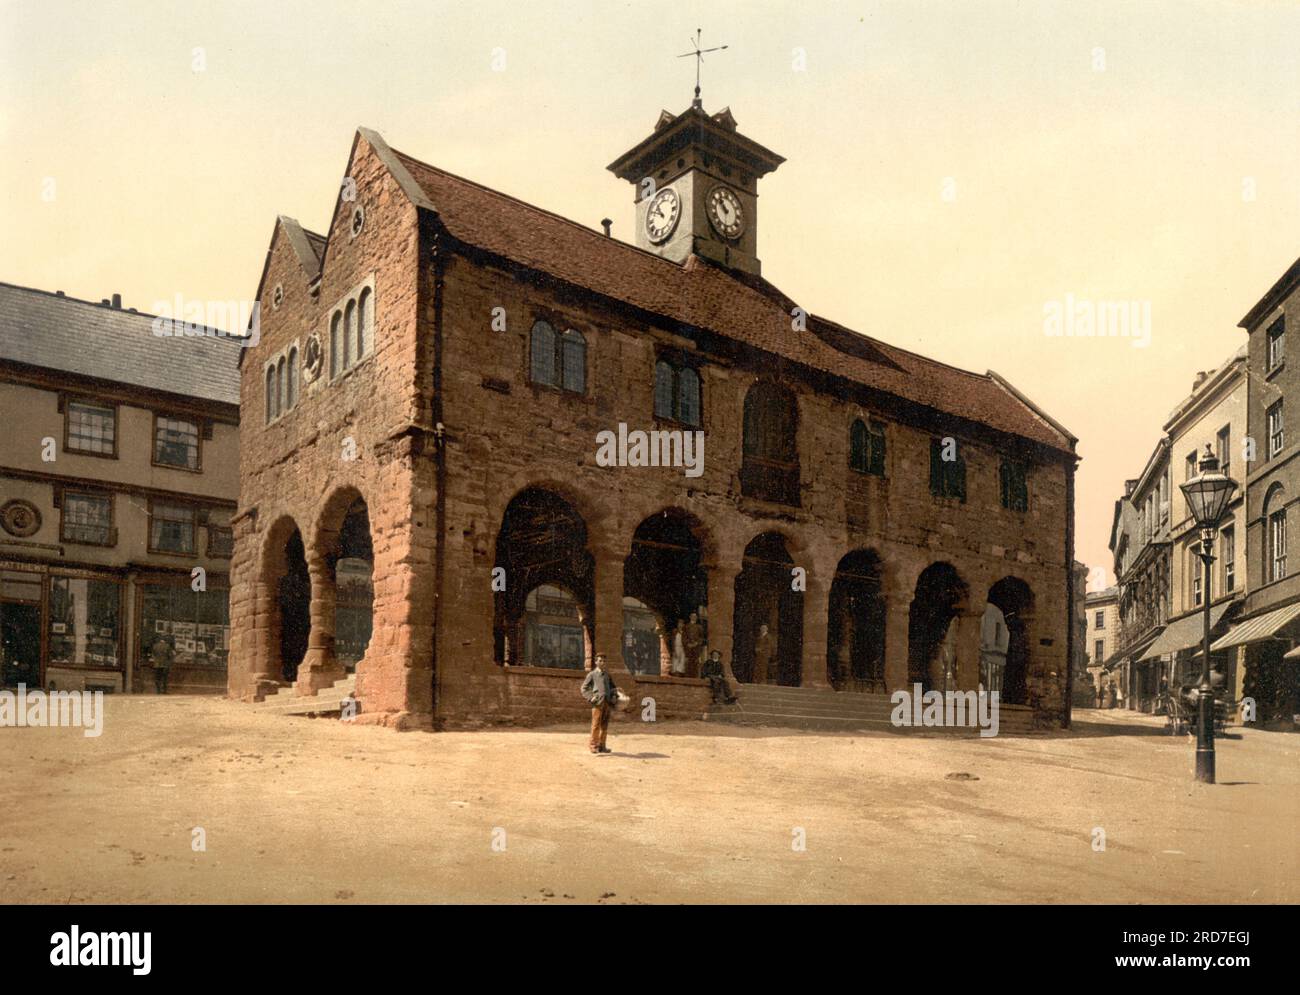 Market Hall, Ross-on-Wye, a market town and civil parish in Herefordshire, England, 1895, Historical, digital improved reproduction of an old Photochrome print Stock Photo